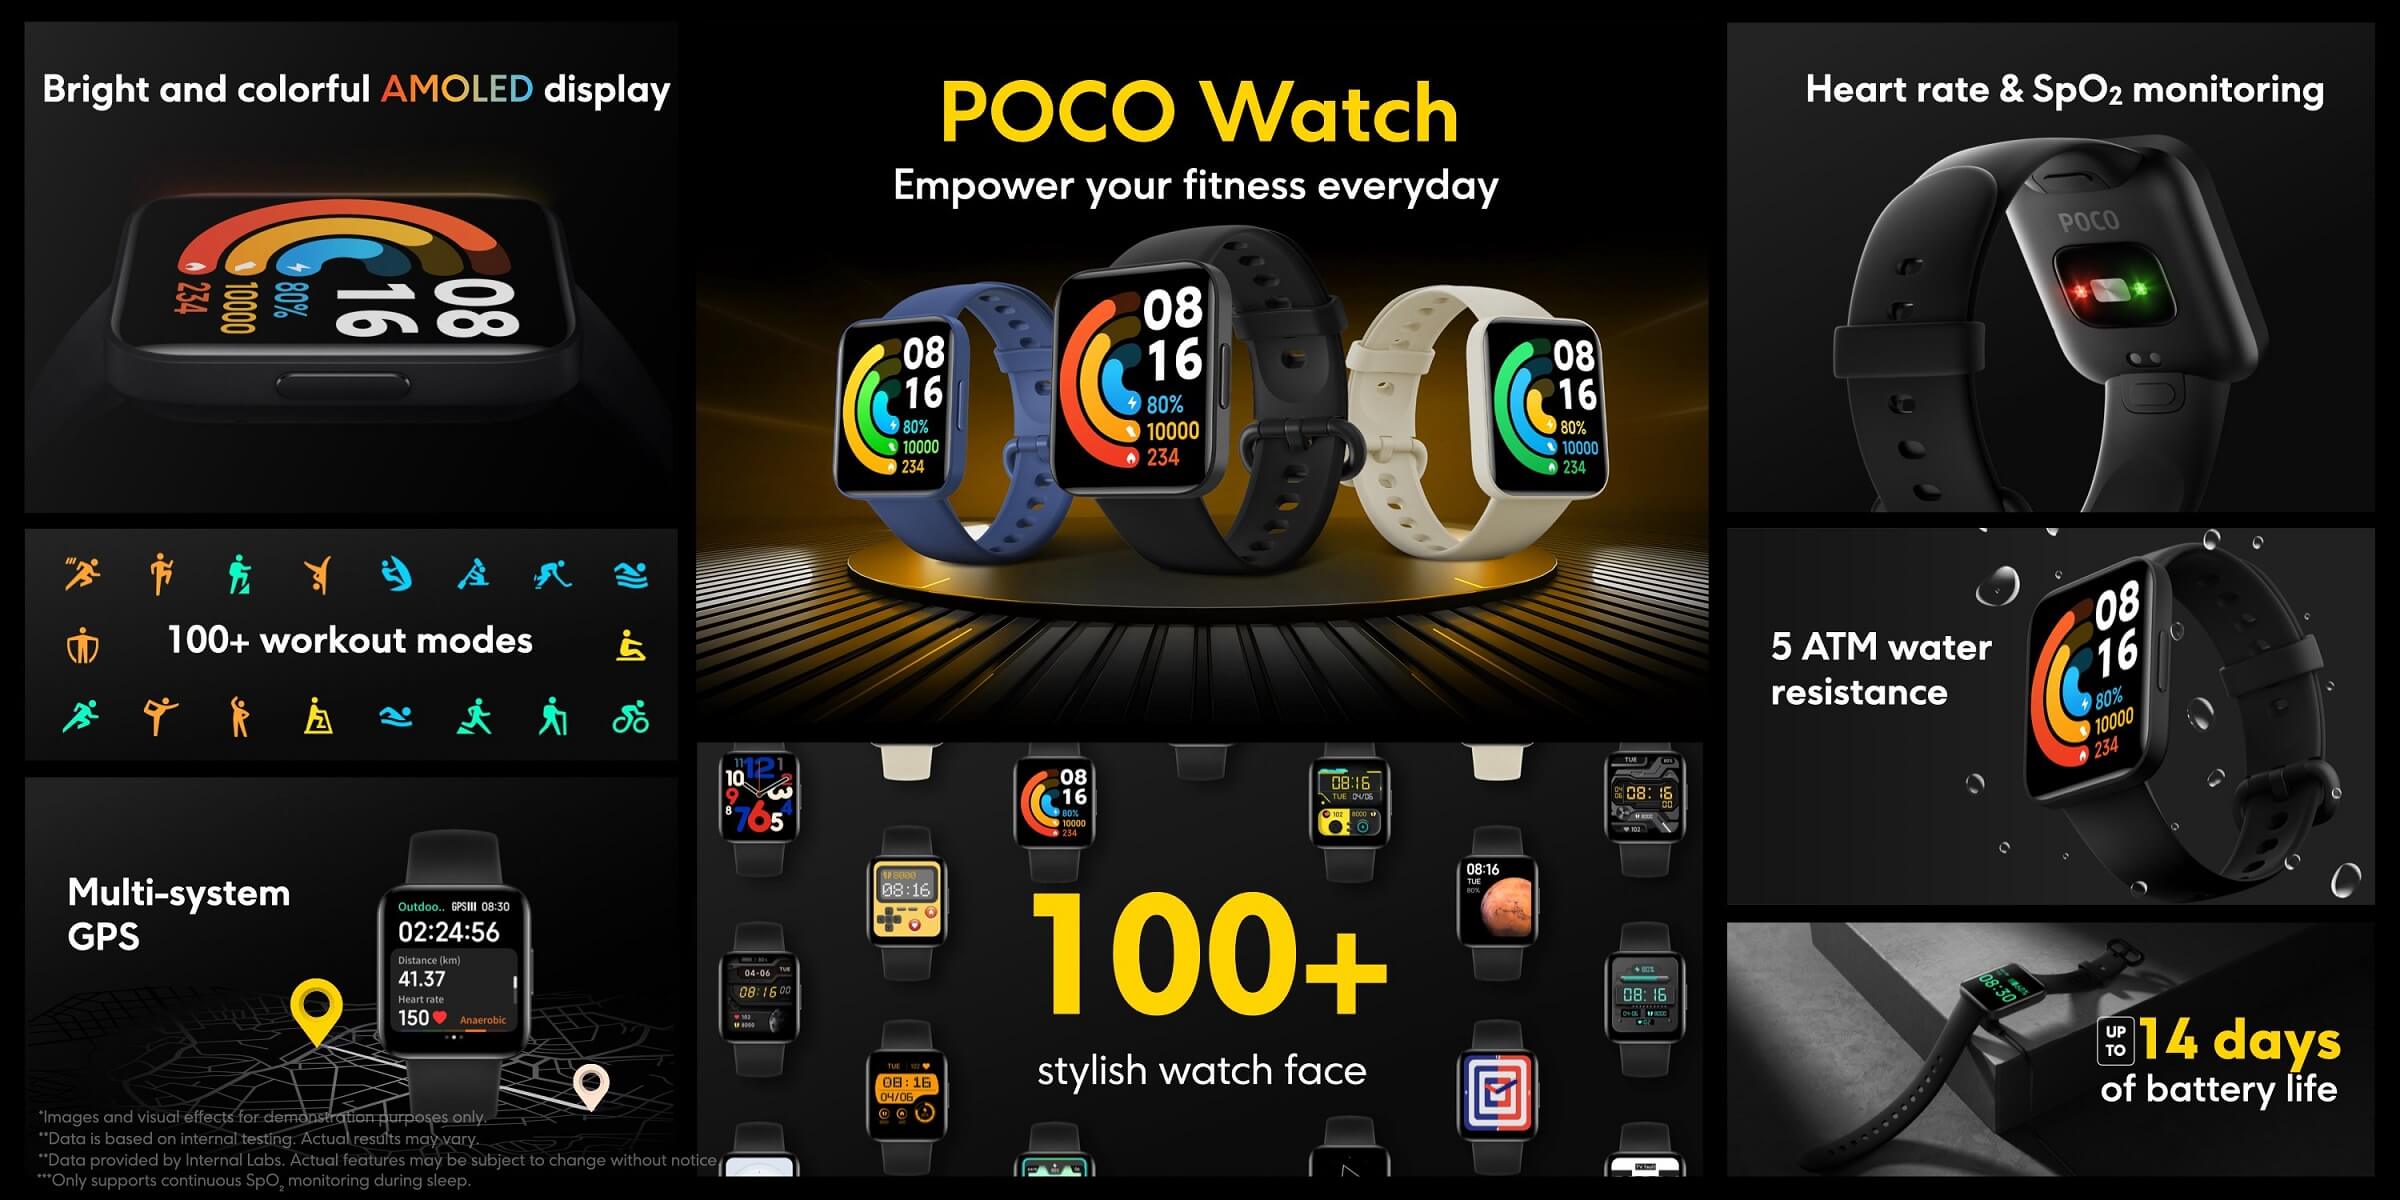 POCO Watch features